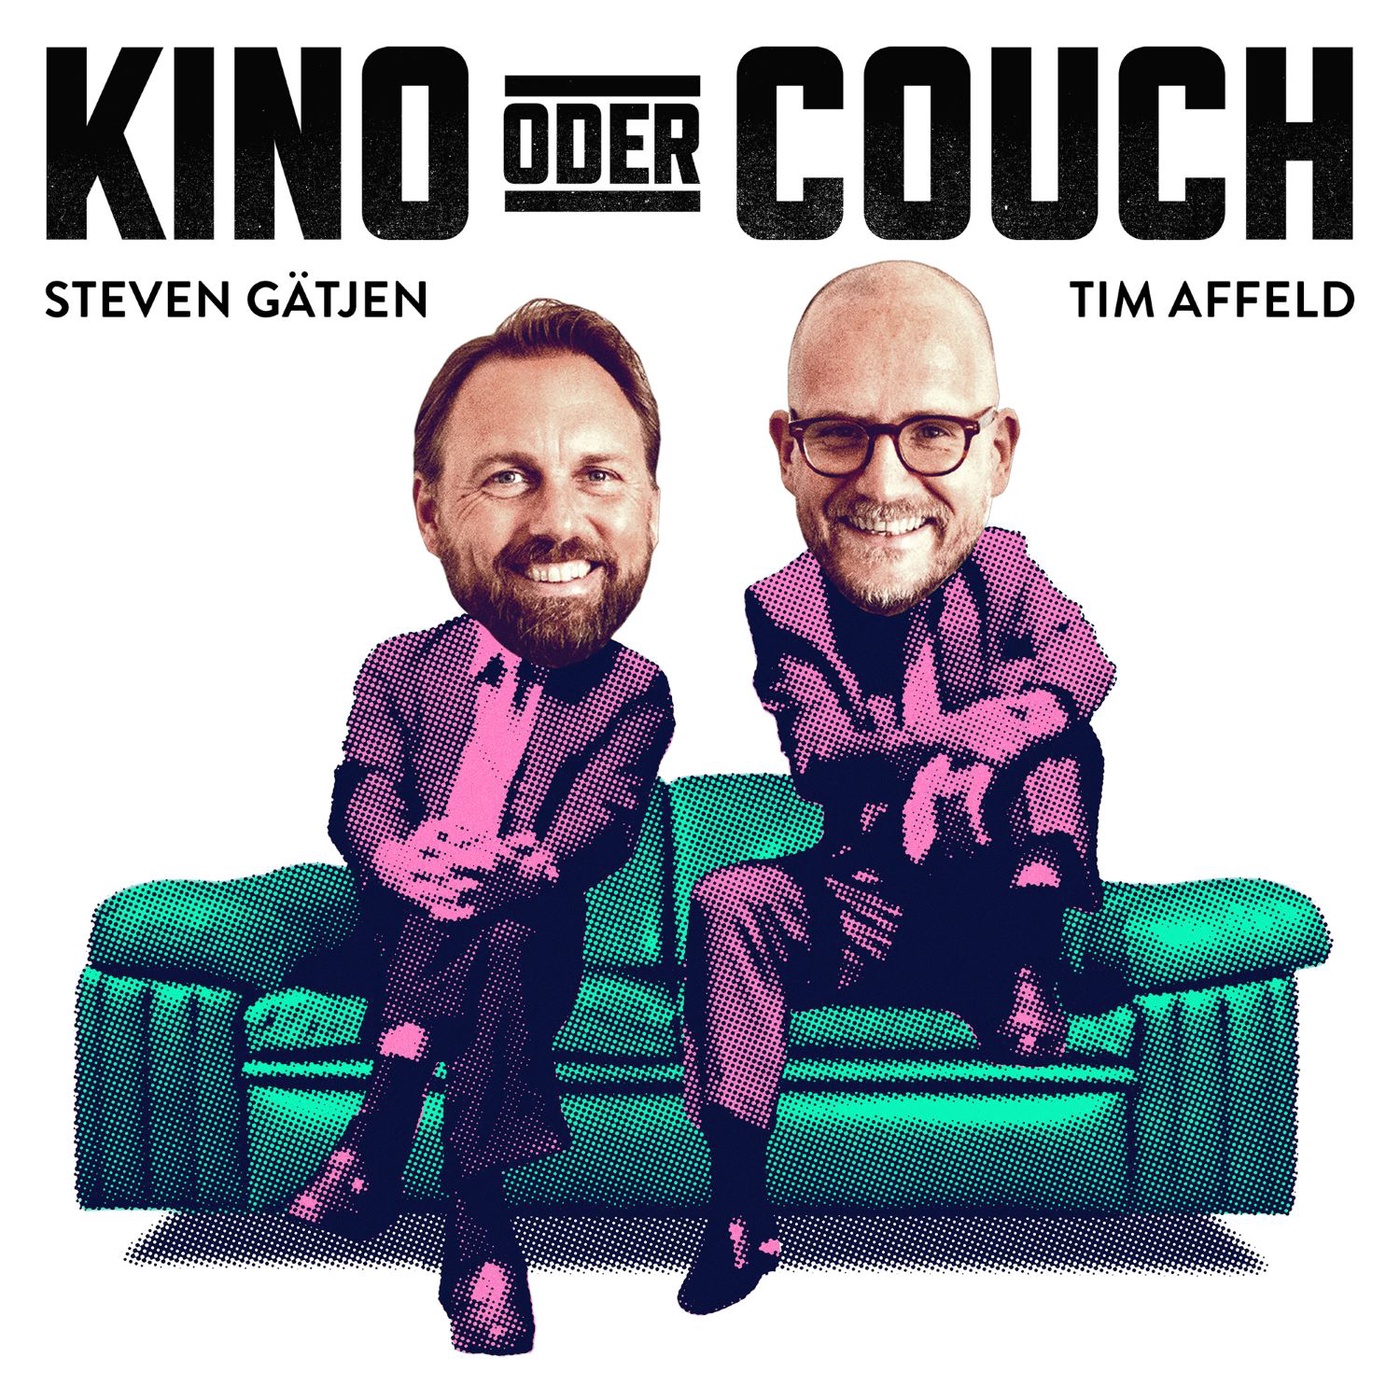 Kino oder Couch